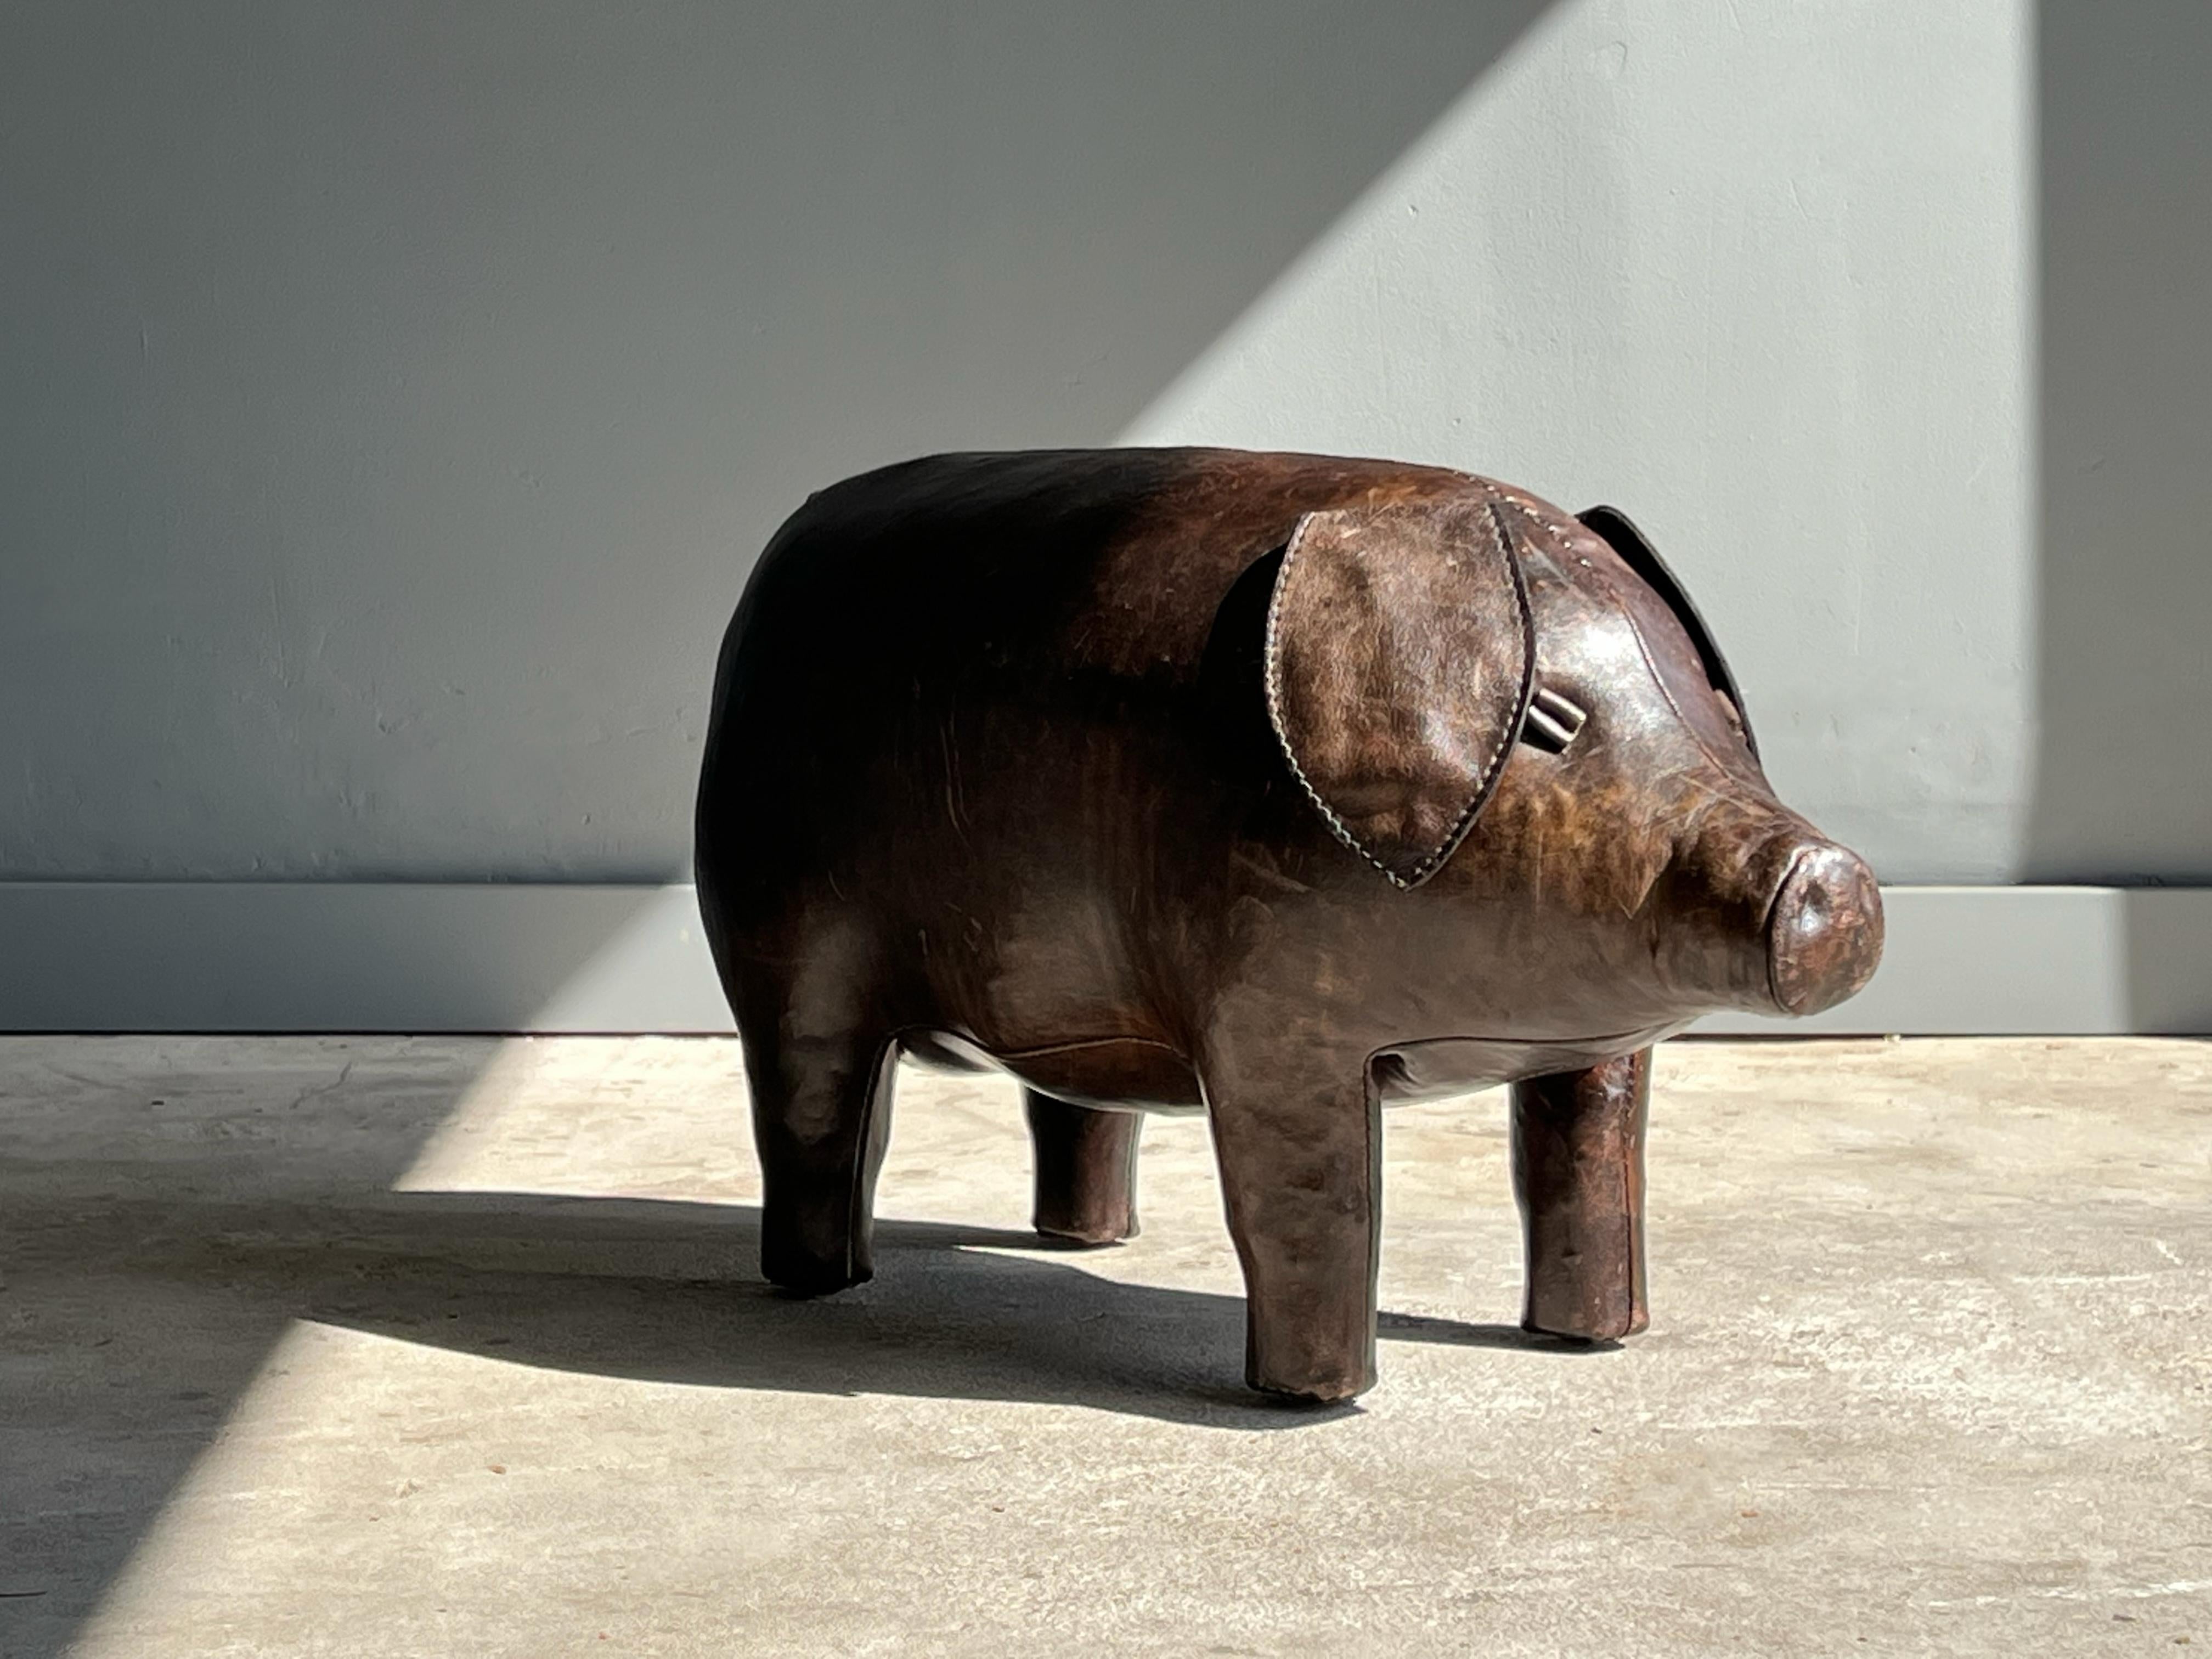 Wonderful leather stool or object by Dimitri Omersa for Abercrombie and Fitch. This pig is all hand stitched aged leather and shows and wonderful patina to its leather. No rips or tears.